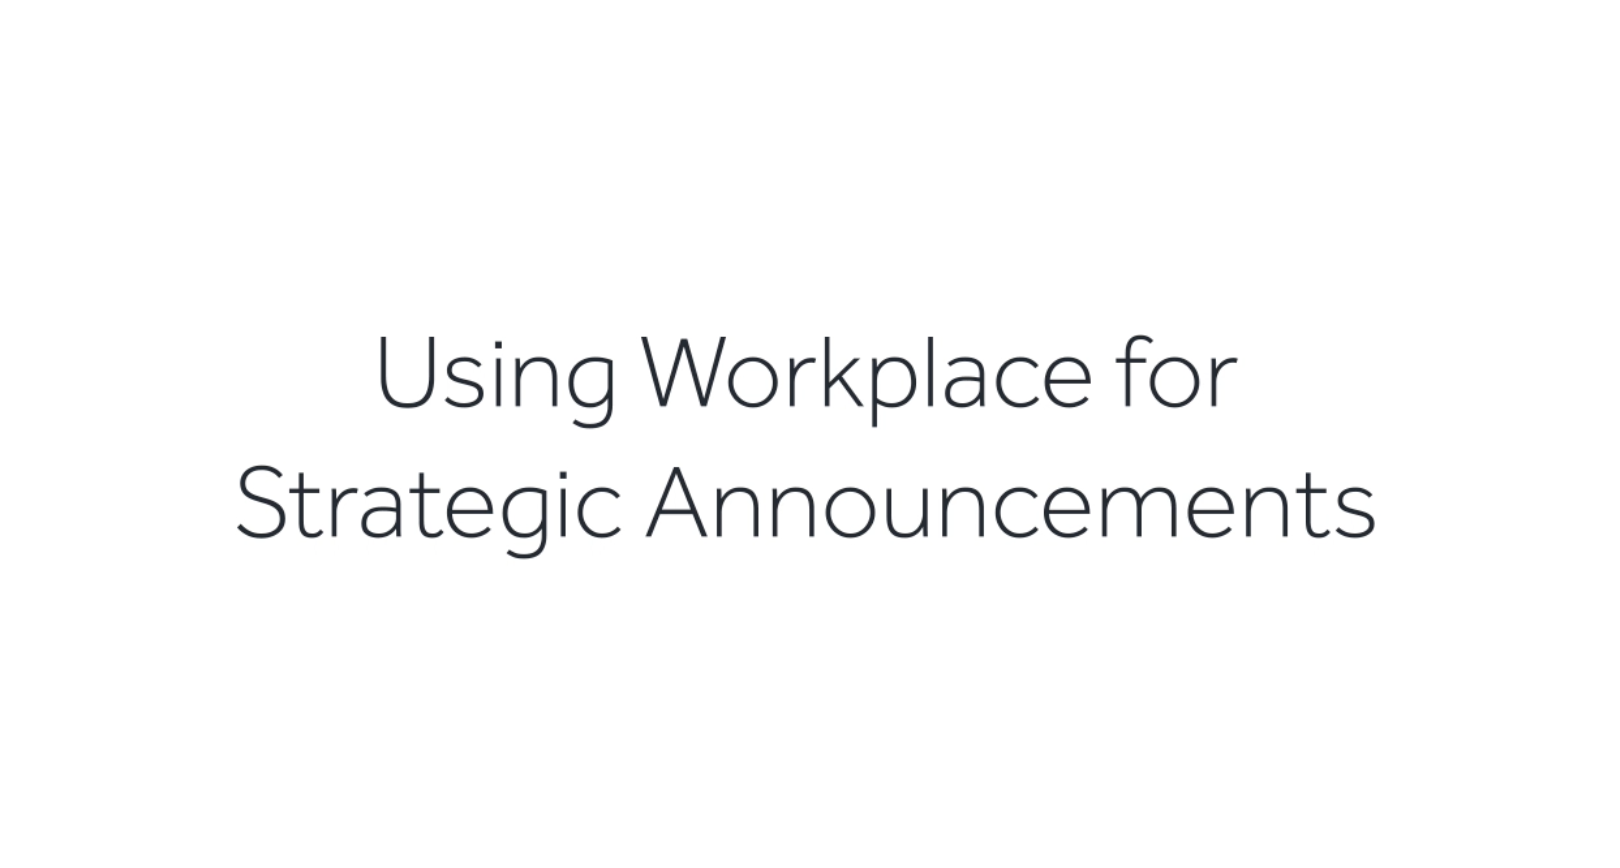 Learn how to use Workplace for strategic announcements